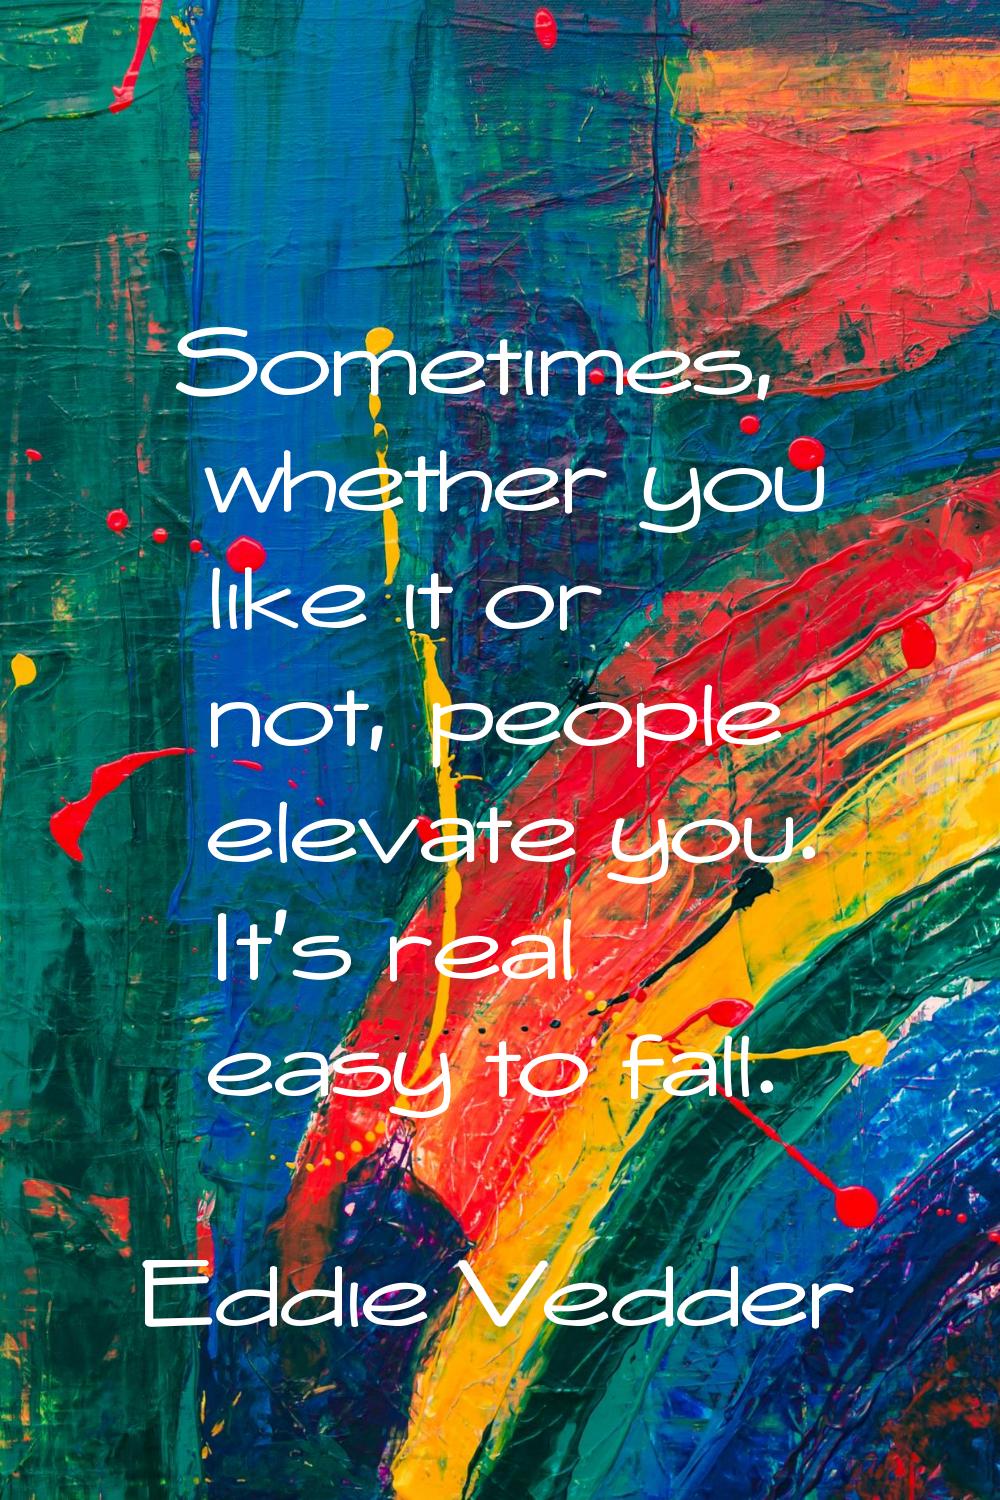 Sometimes, whether you like it or not, people elevate you. It's real easy to fall.